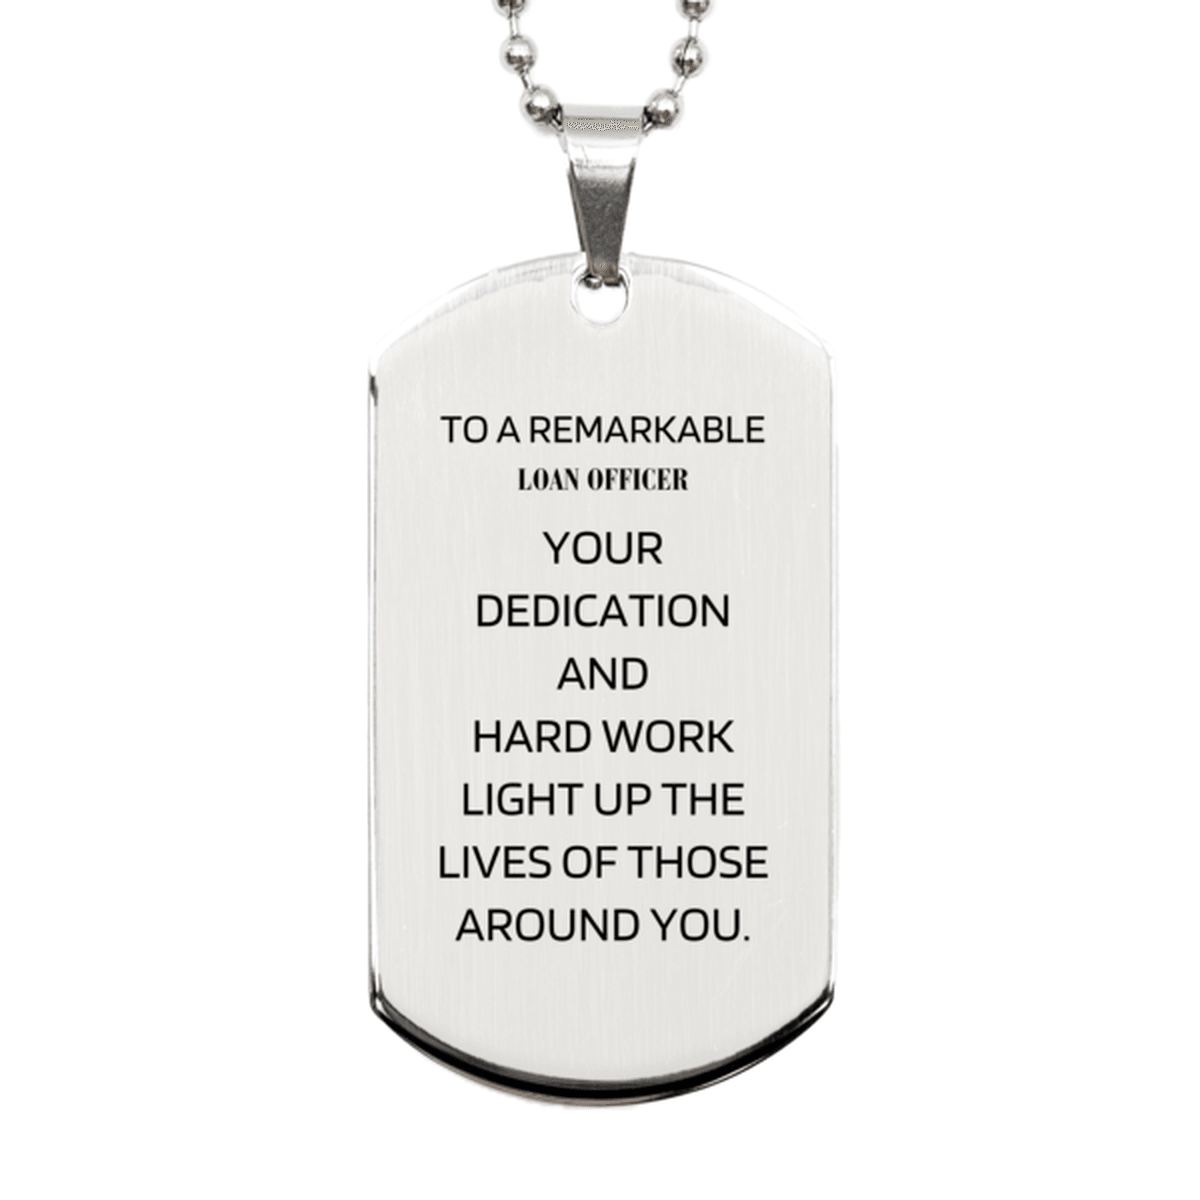 Remarkable Loan Officer Gifts, Your dedication and hard work, Inspirational Birthday Christmas Unique Silver Dog Tag For Loan Officer, Coworkers, Men, Women, Friends - Mallard Moon Gift Shop